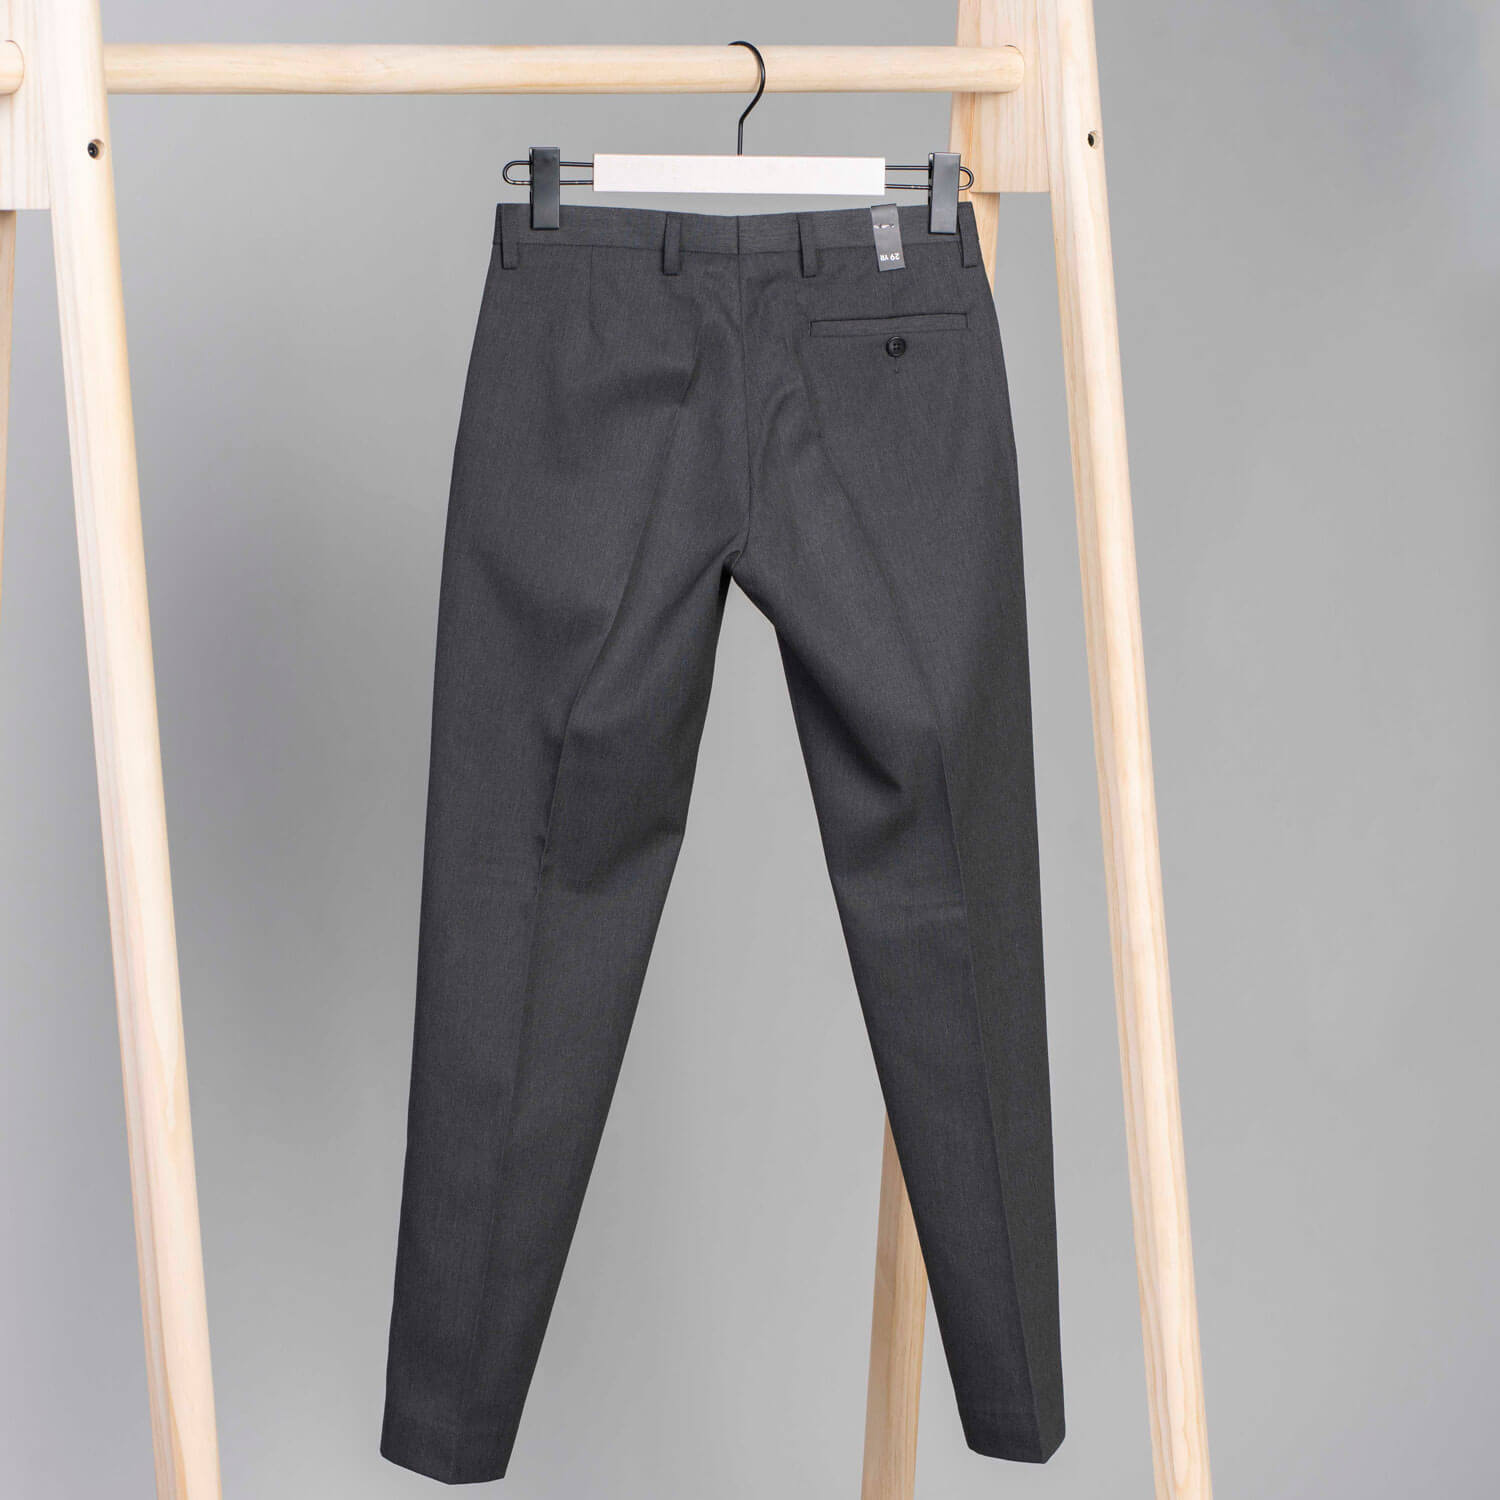 Blue Dot Lewis Youth Boys Trousers - Grey 2 Shaws Department Stores